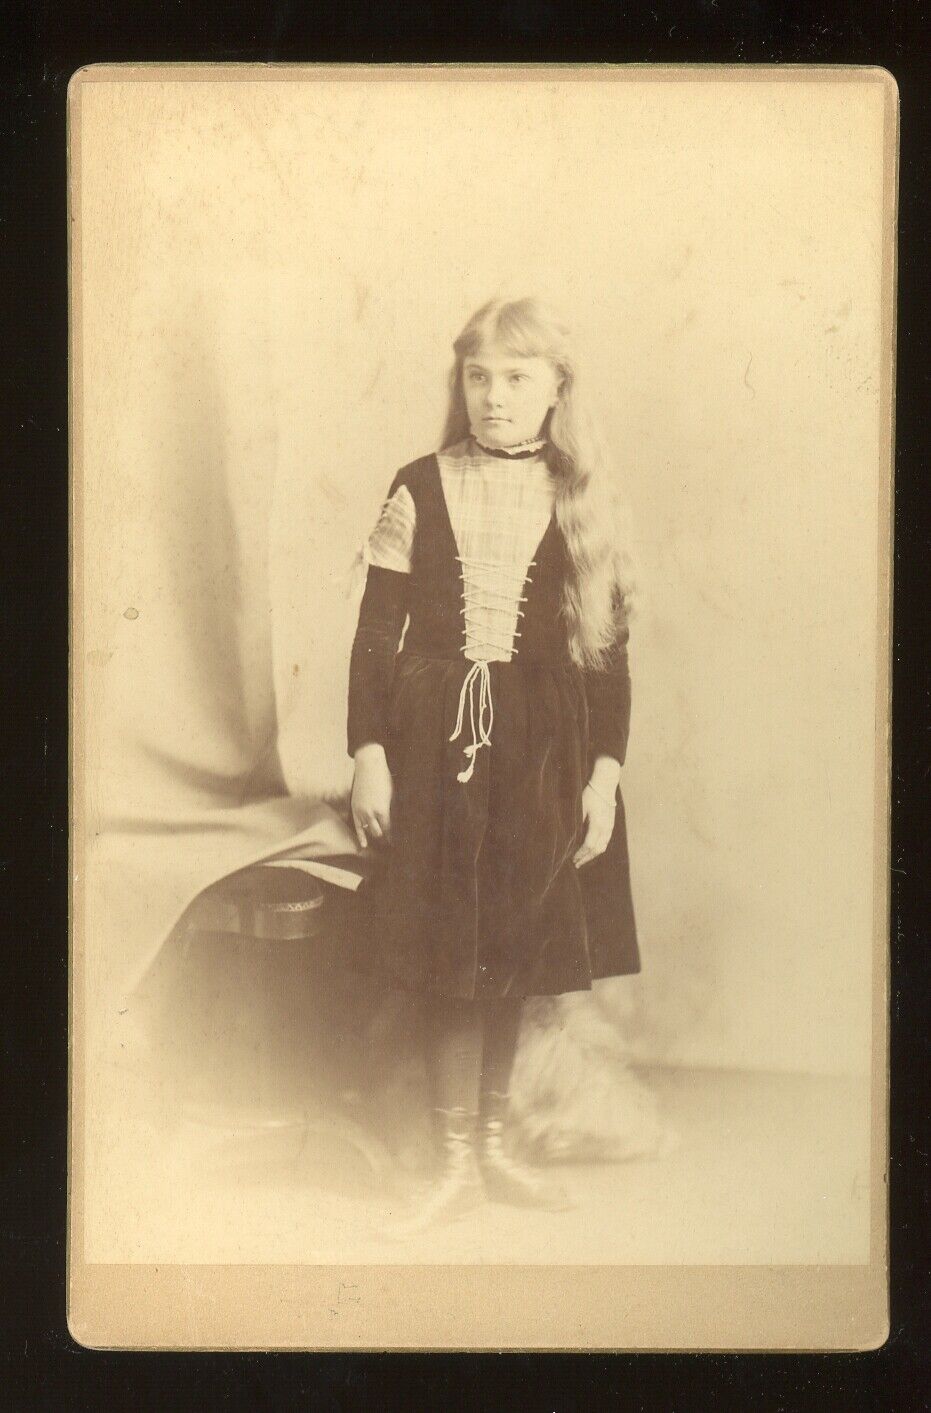 CA, Oakland. CABINET PHOTO showing a PRETTY YOUNG GIRL. \